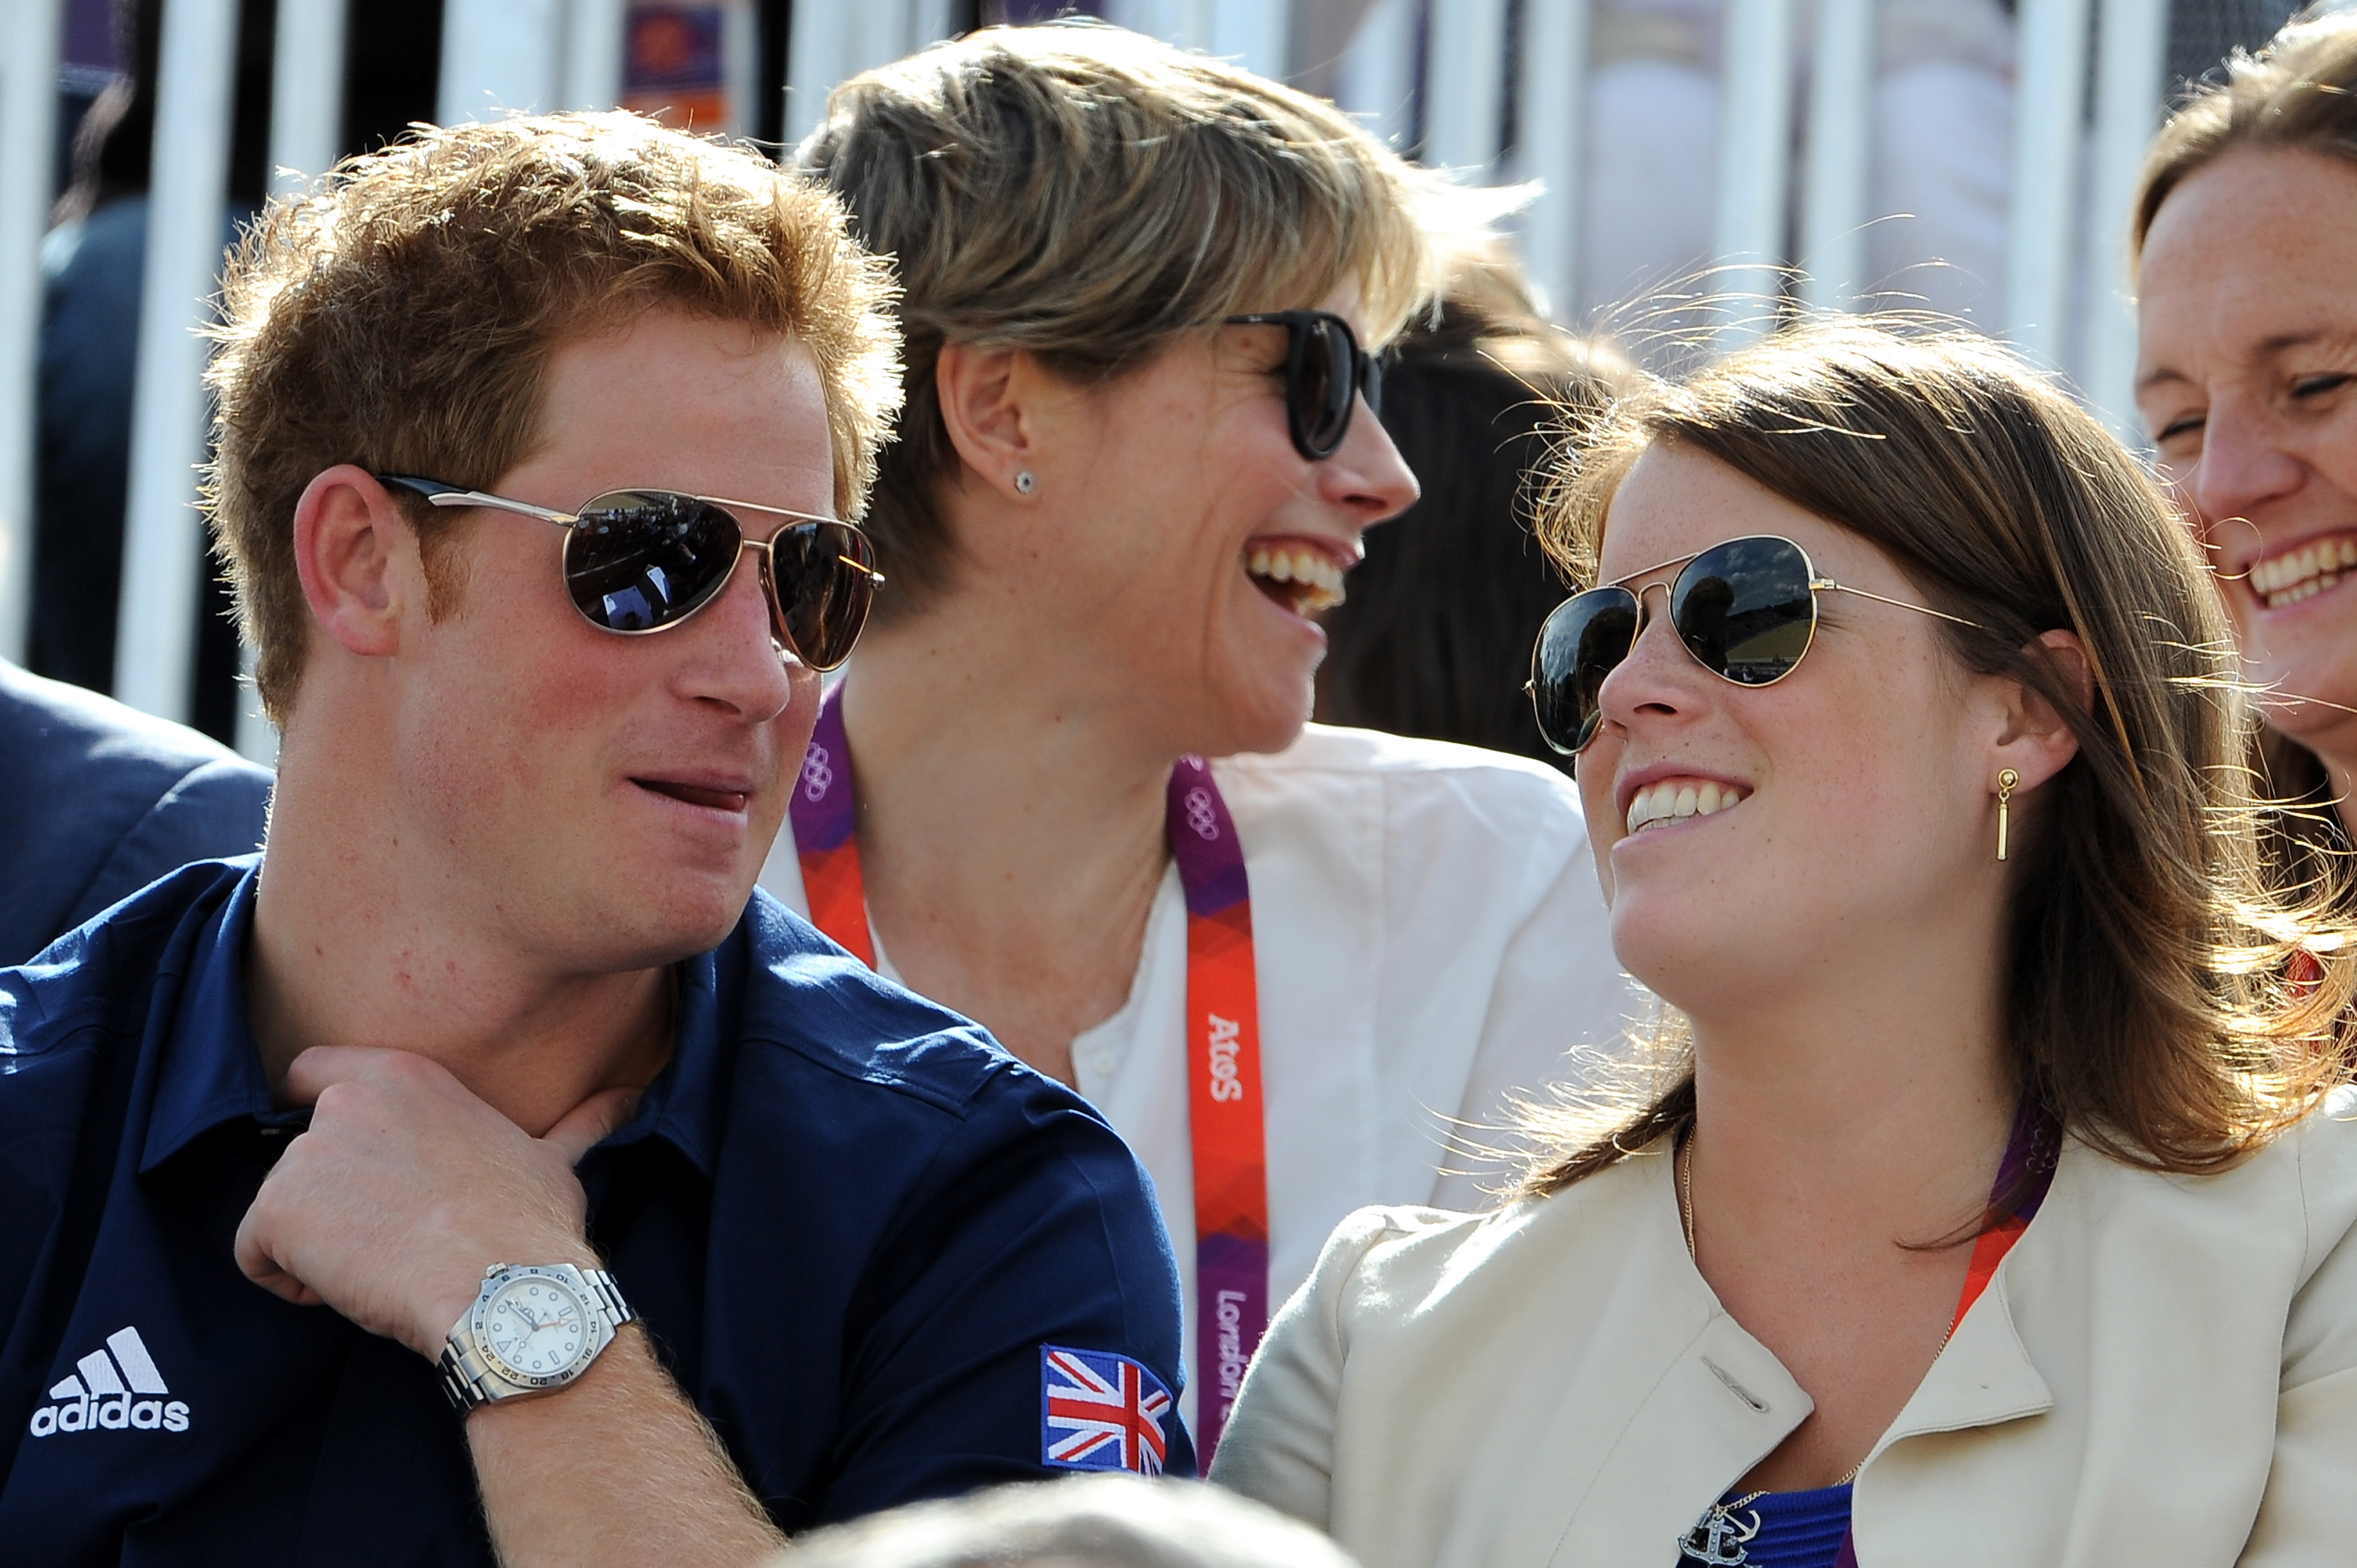 Prince Harry and Princess Eugenie at the Eventing Cross Country Equestrian event on Day 3 of the London 2012 Olympic Games at Greenwich Park on July 30, 2012 in London, England. | Source: Getty Images